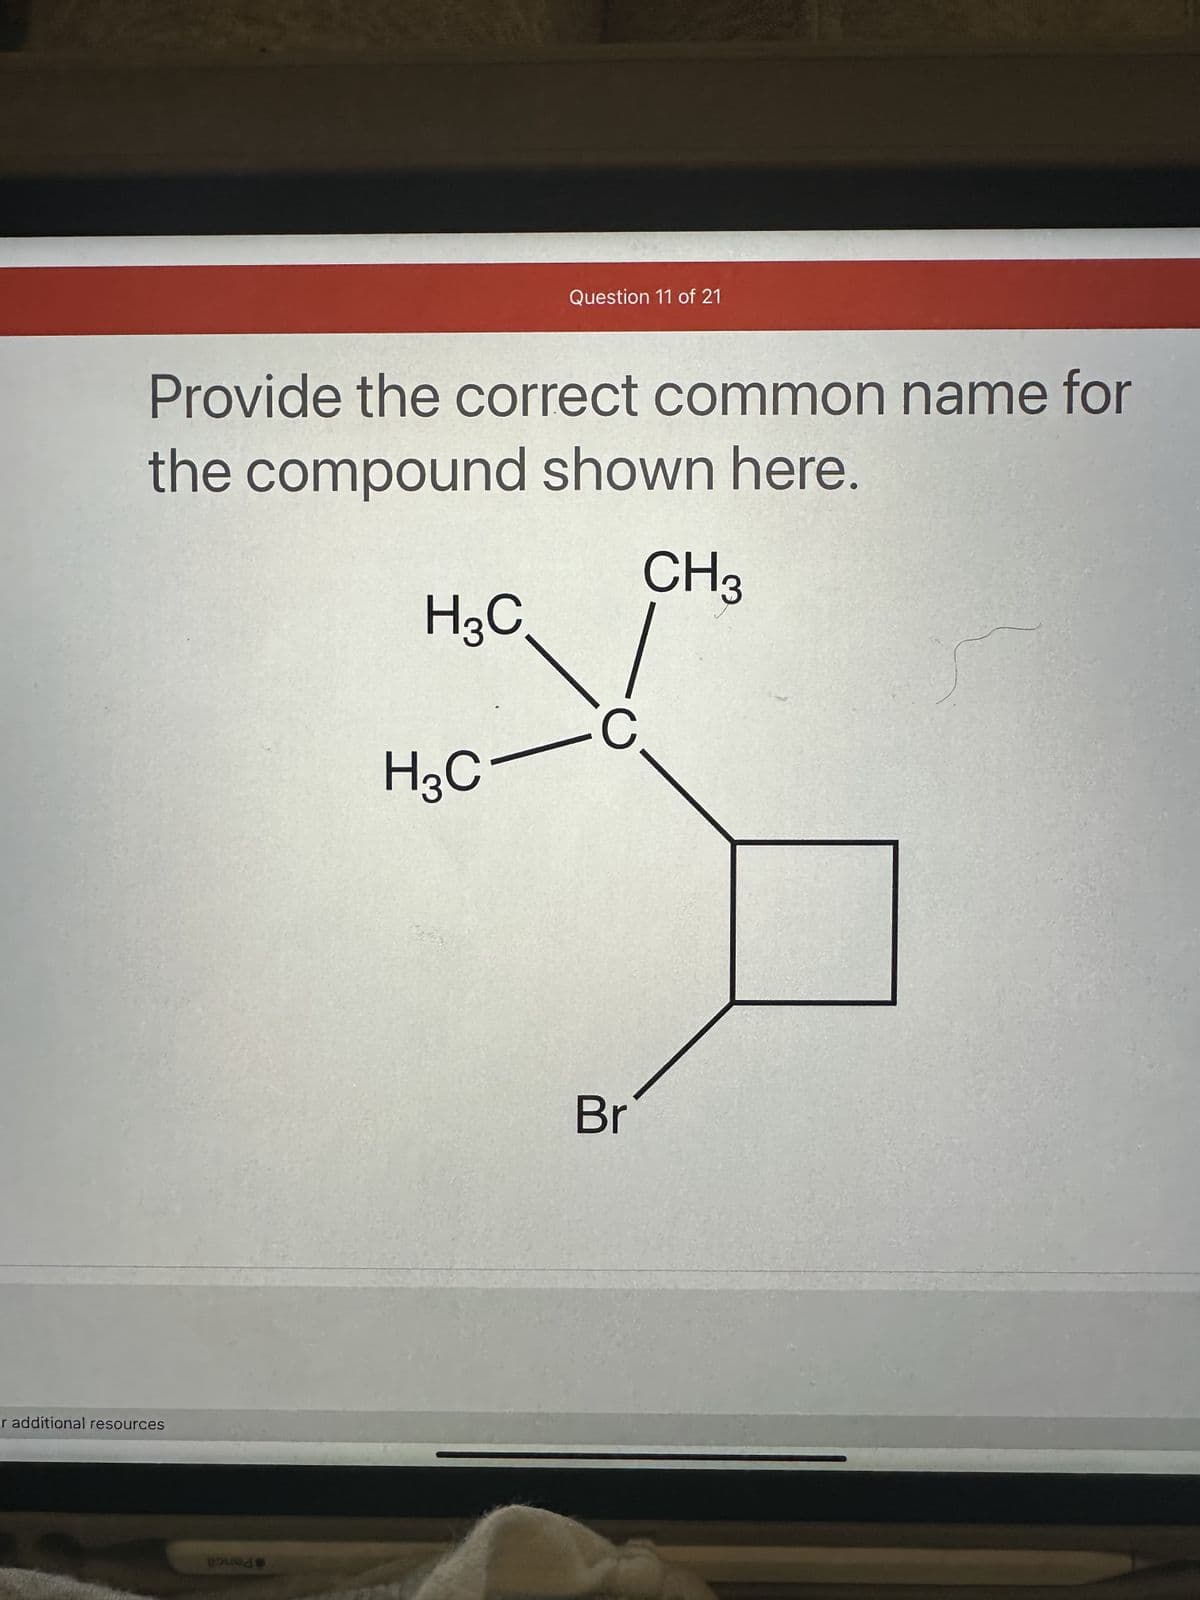 Provide the correct common name for
the compound shown here.
CH3
or additional resources
Bound
H₂C
Question 11 of 21
H3C
Br